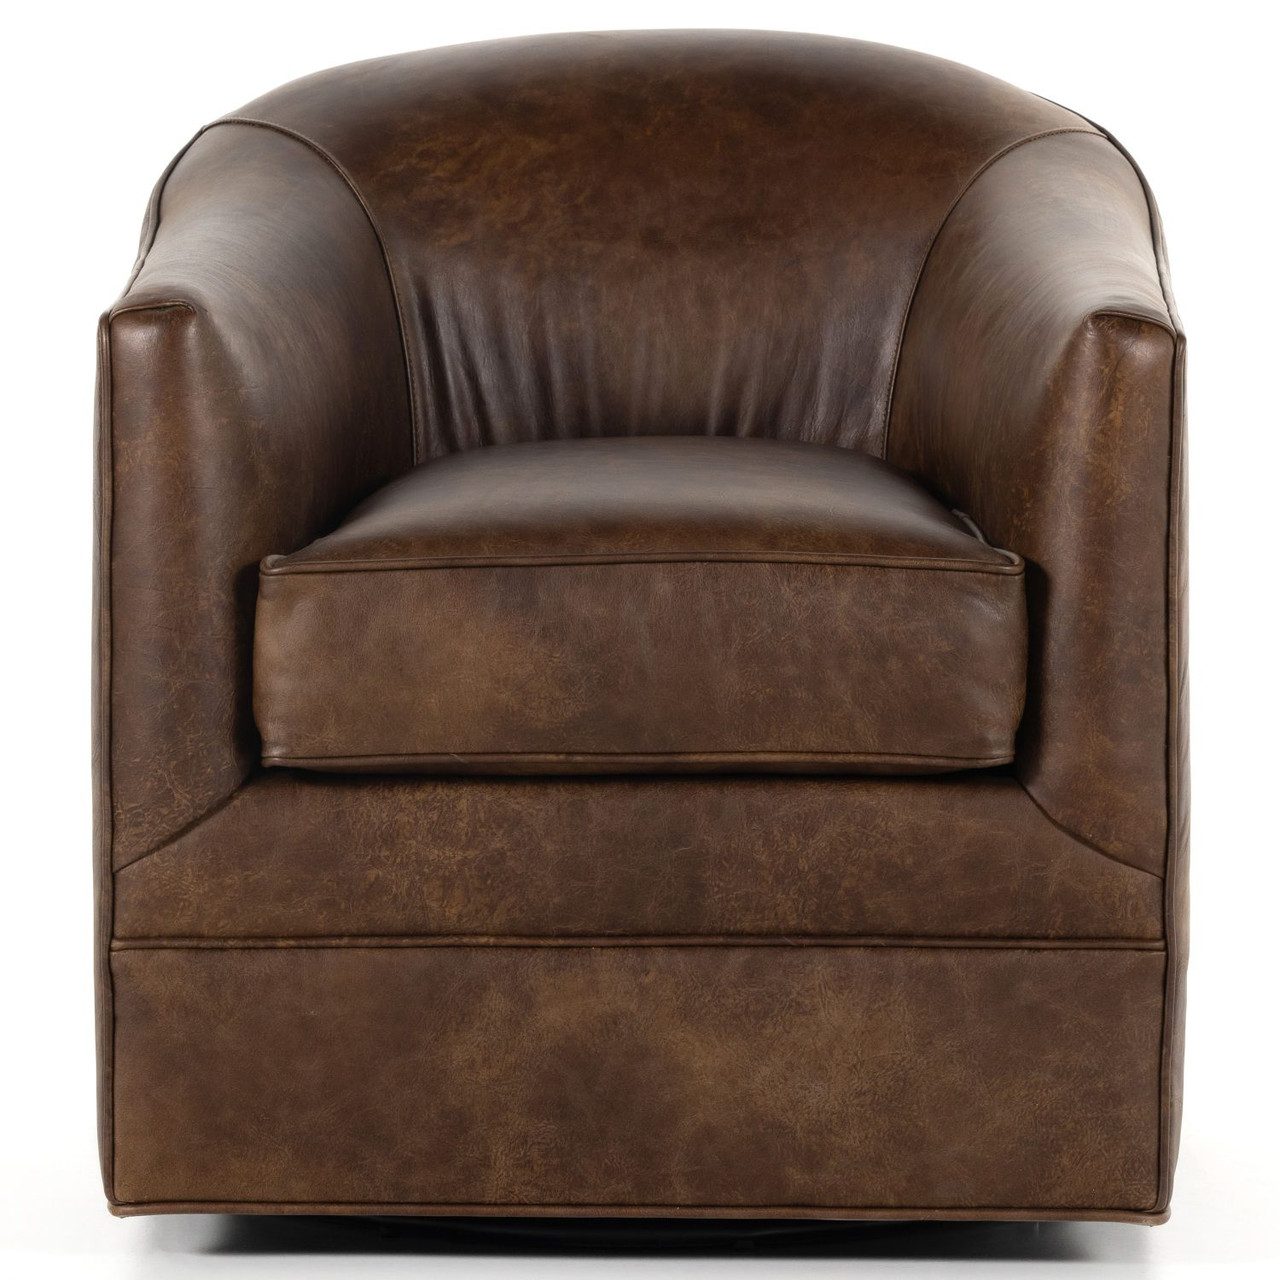 Quinton Arvada Cigar Leather Swivel Chair | Zin Home